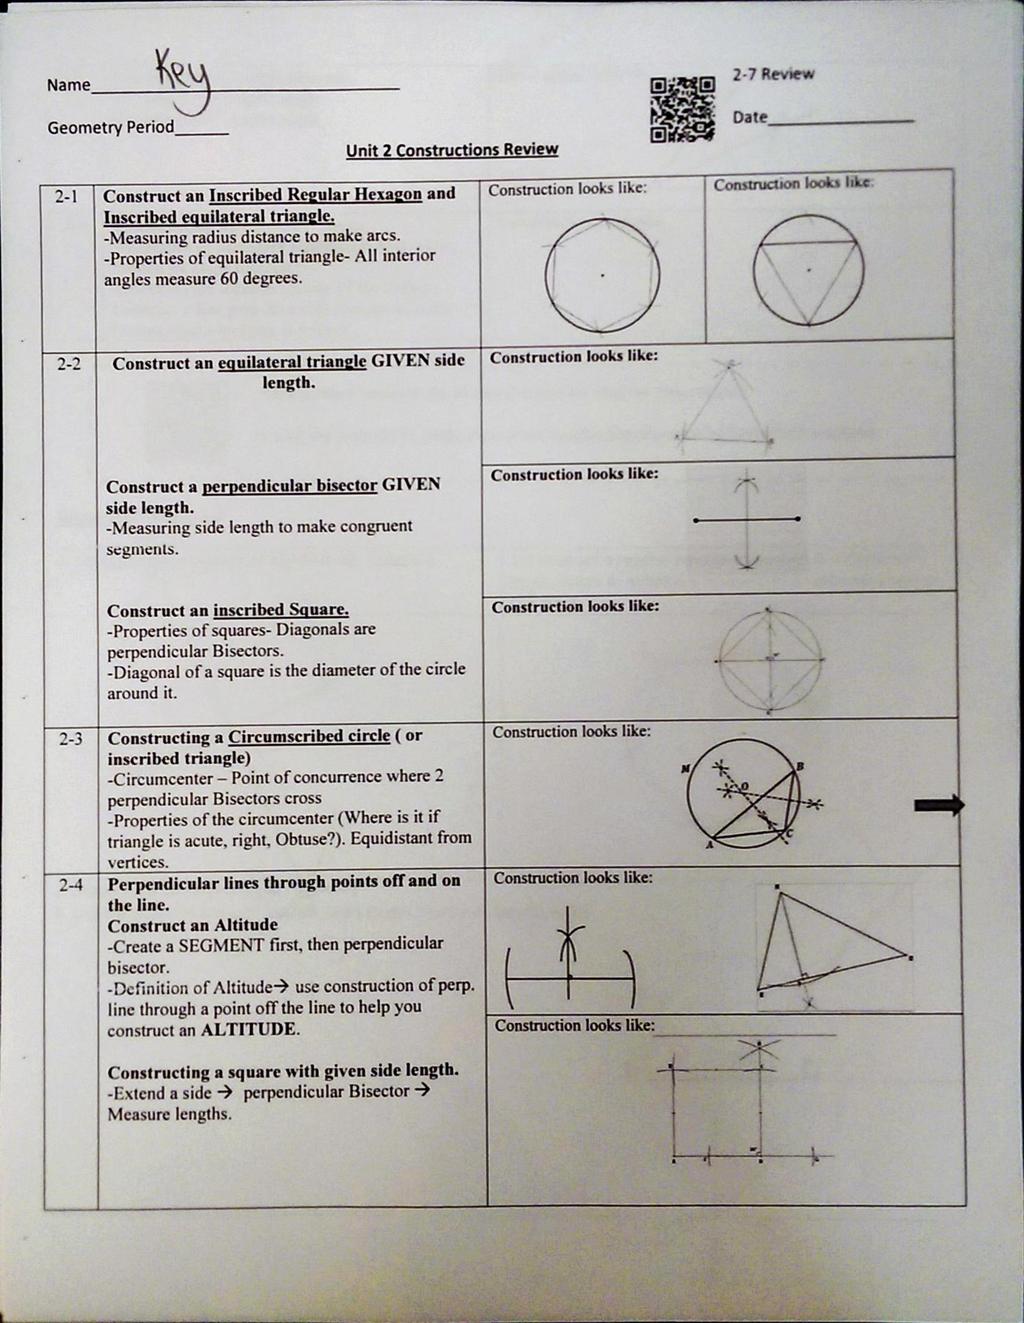 Name Geometry Period Unit 2 Constructions Review 2-1 Construct an Inscribed Regular Hexagon and Inscribed equilateral triangle. -Measuring radius distance to make arcs.